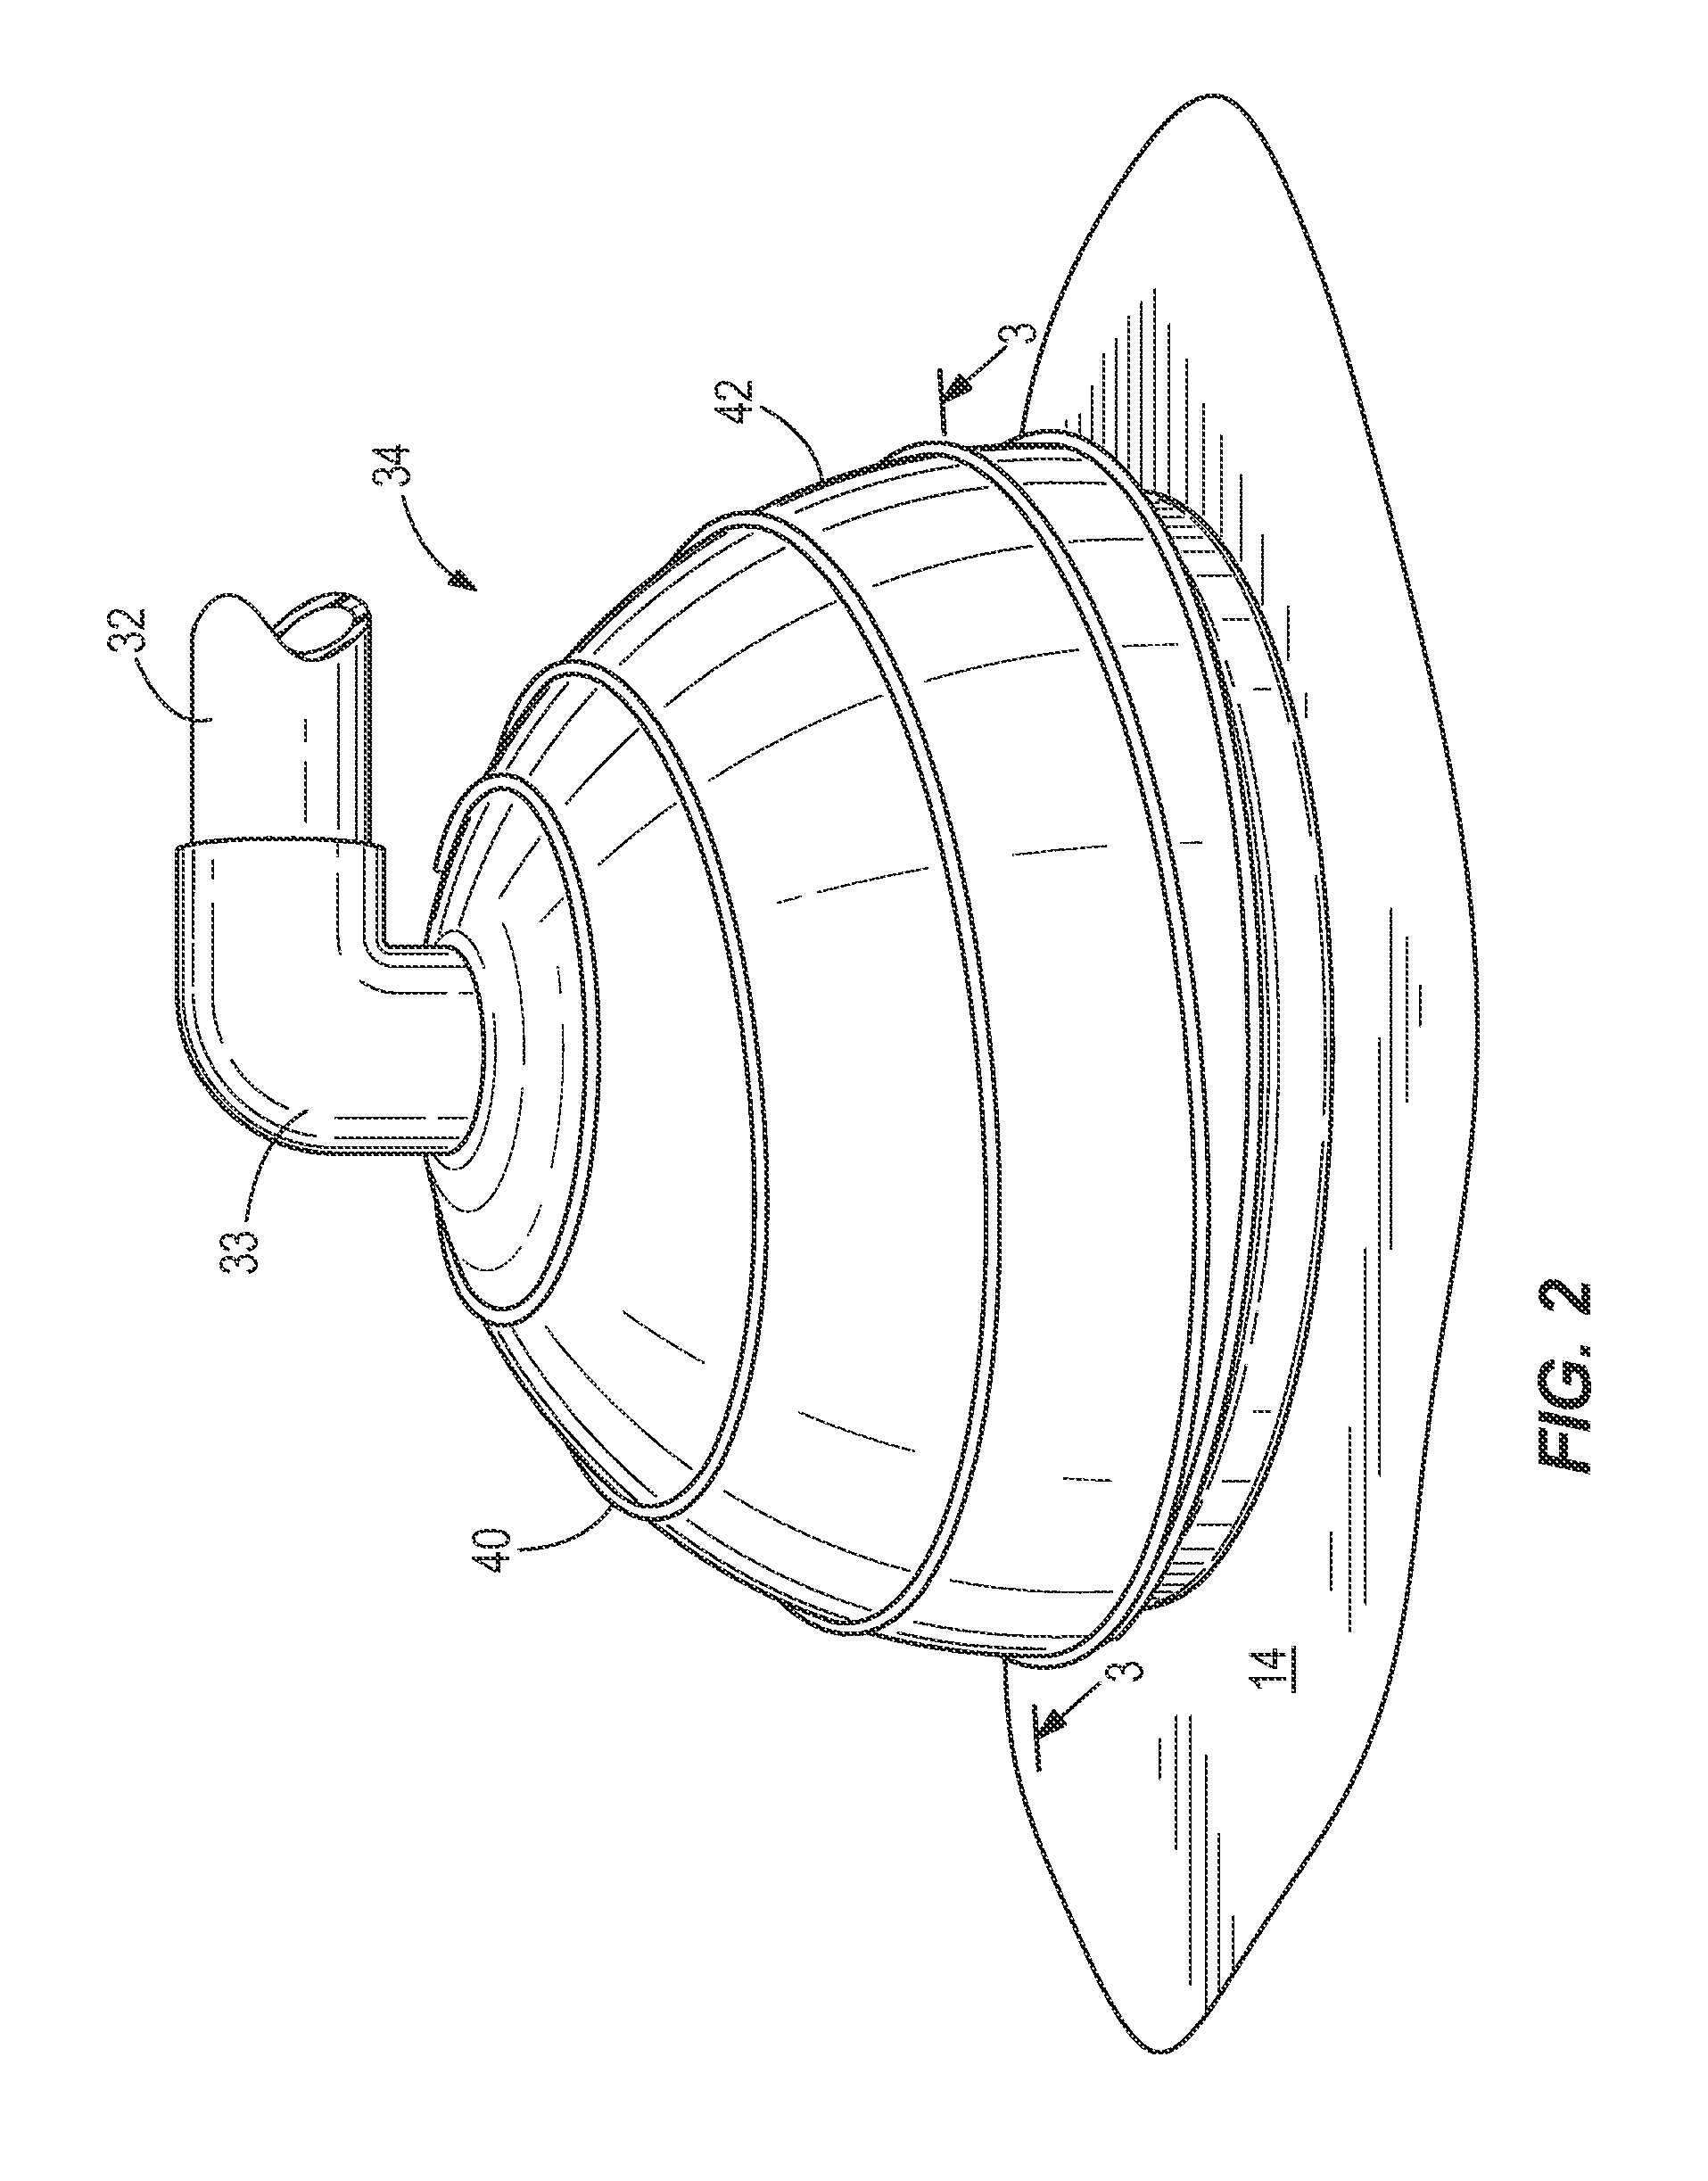 Curved Passive Acoustic Driver for Magnetic Resonance Elastography